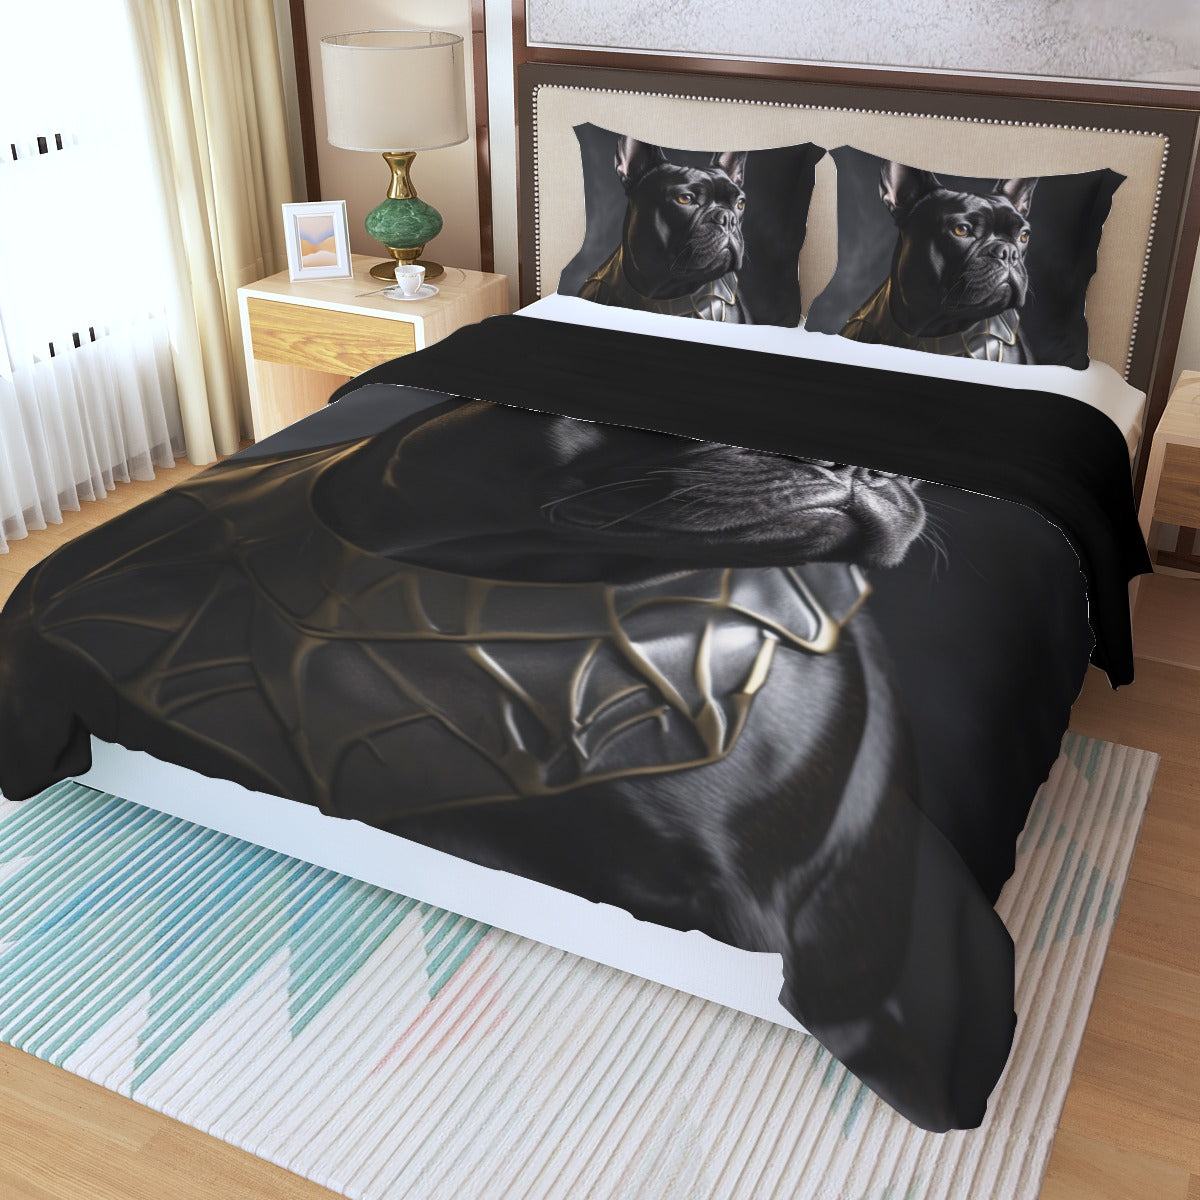 Stealthy Frenchie Duvet Cover Set - Sleep with Prowess